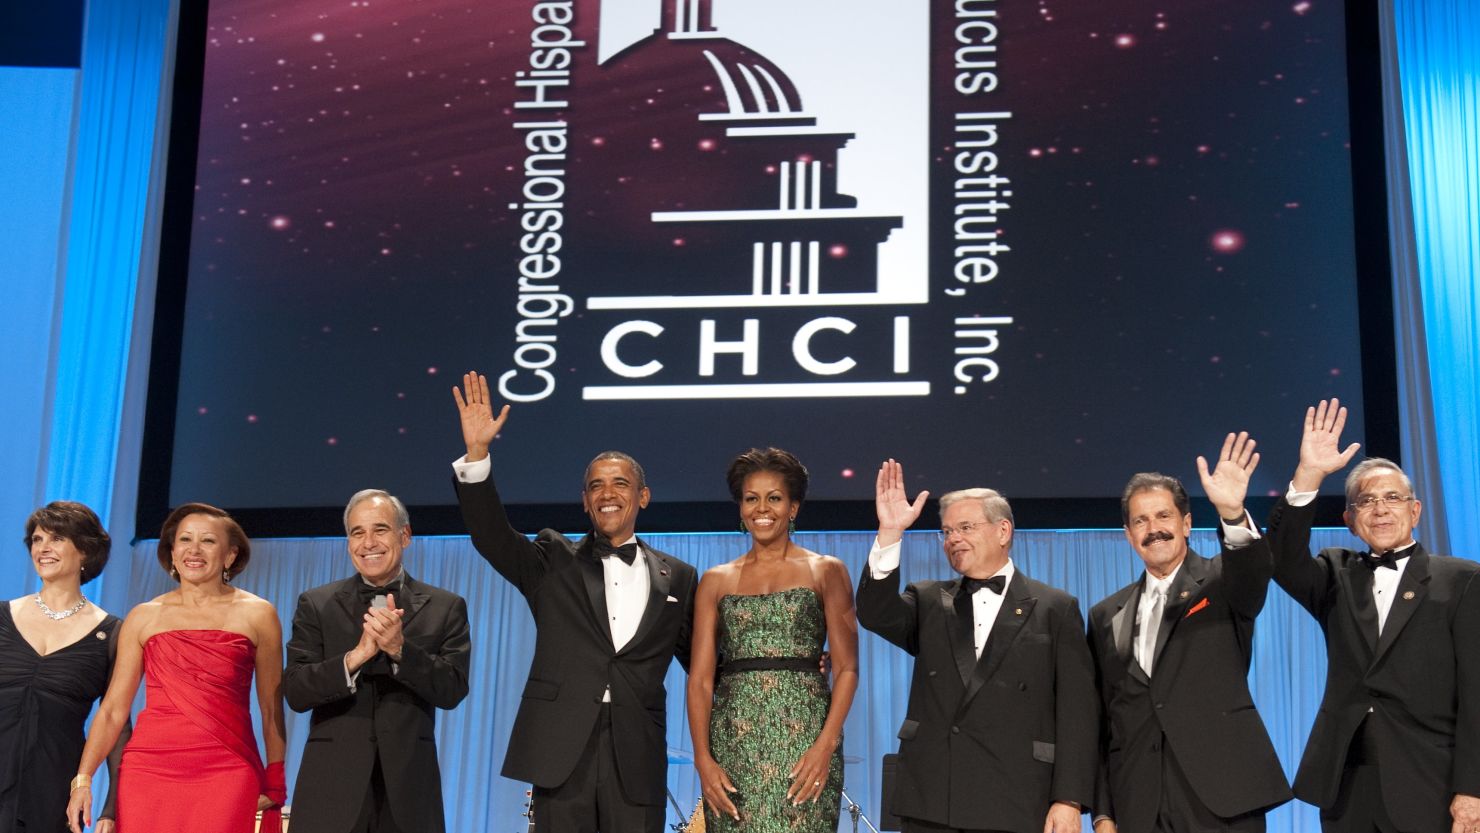 President Barack Obama and First Lady Michelle Obama wave alongside Hispanic members of Congress as they attend the Congressional Hispanic Caucus Institute's gala Wednesday..